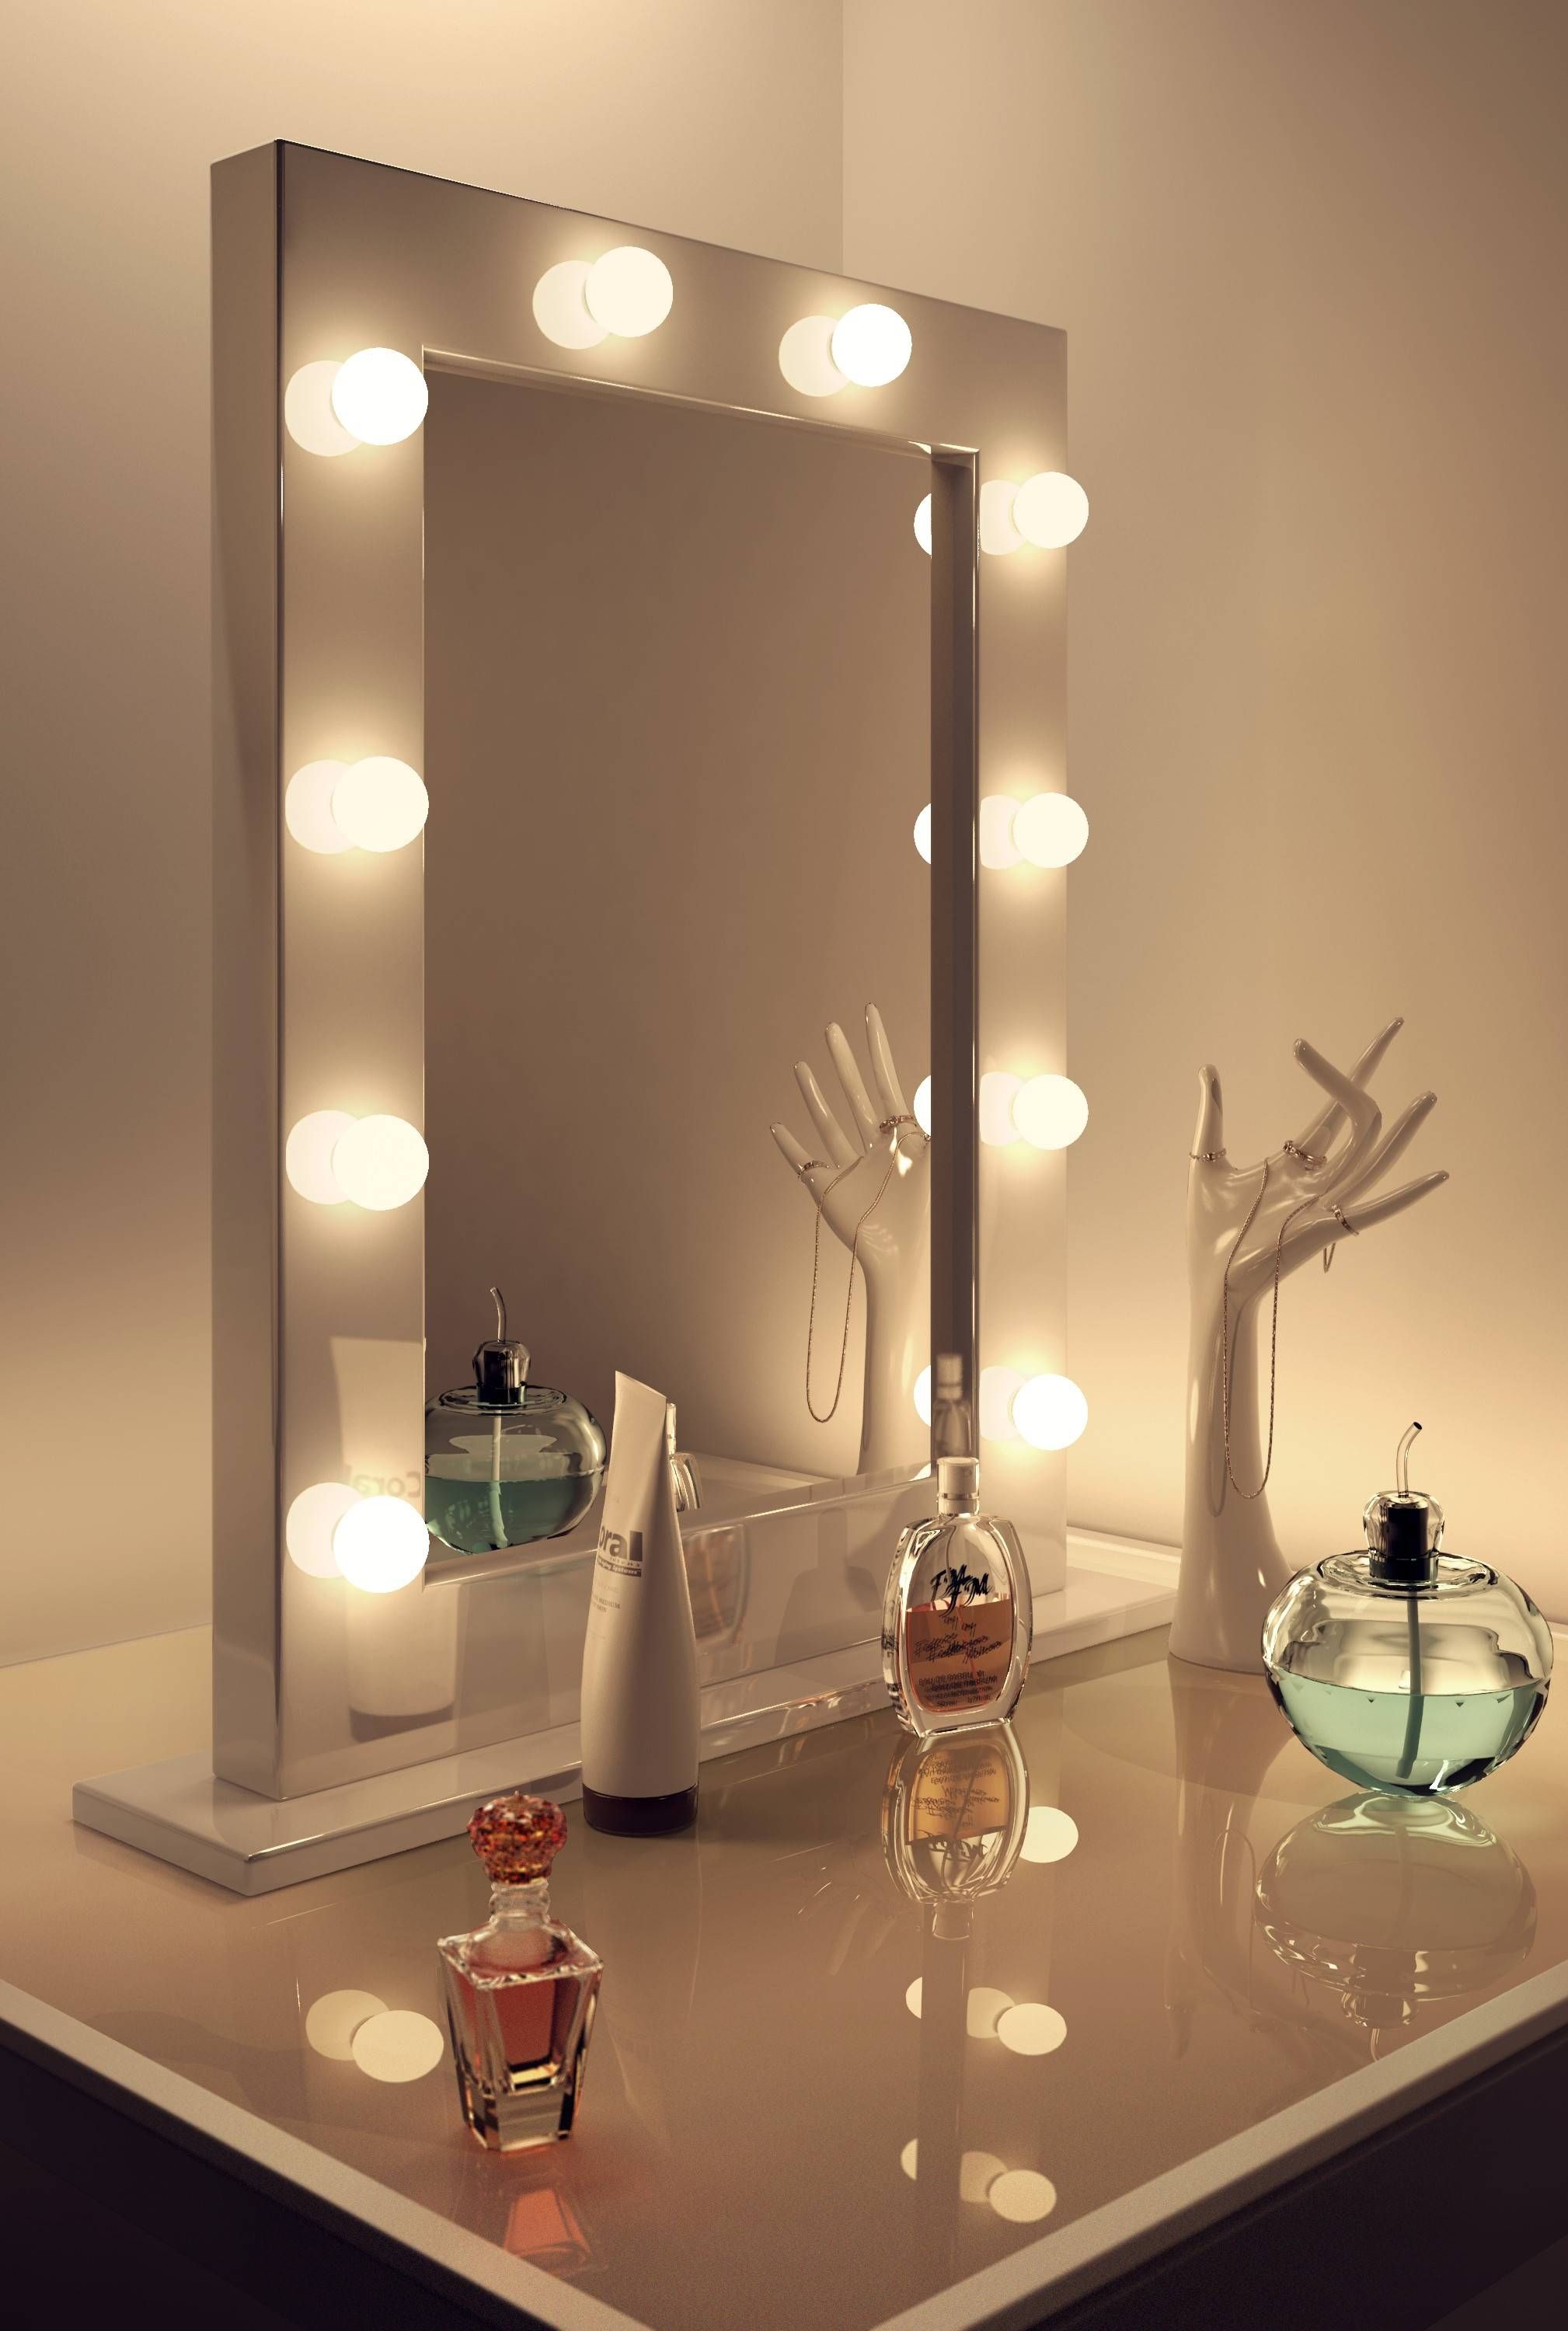 Contemporary Dressing Table With Free Standing Framed Mirror Decor Inside Free Standing Mirrors For Dressing Table (View 7 of 15)